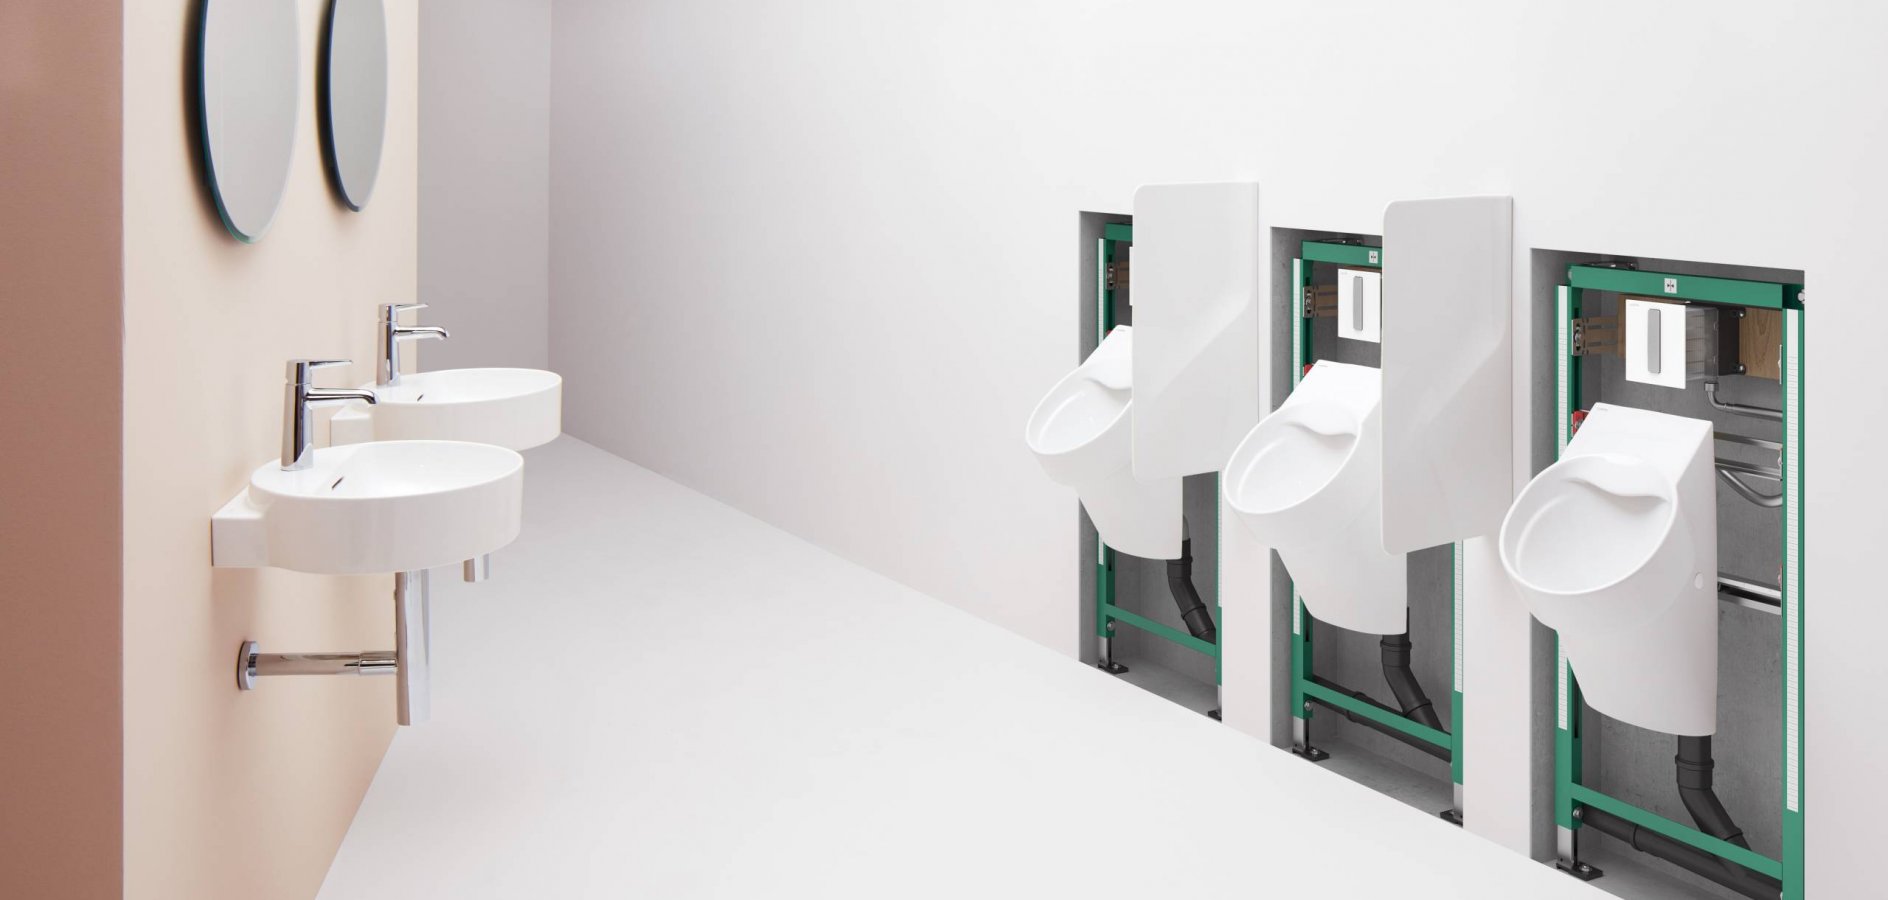 LAUFEN installation system INEO: bathroom, sanitary objects, washbasin, sink, shower, toilet, WC, bidet, urinal, easy assembling, mounting, for in-front of the wall, in-wall and dry-wall installation, construction, renovation, pre-assembled components, Sanit